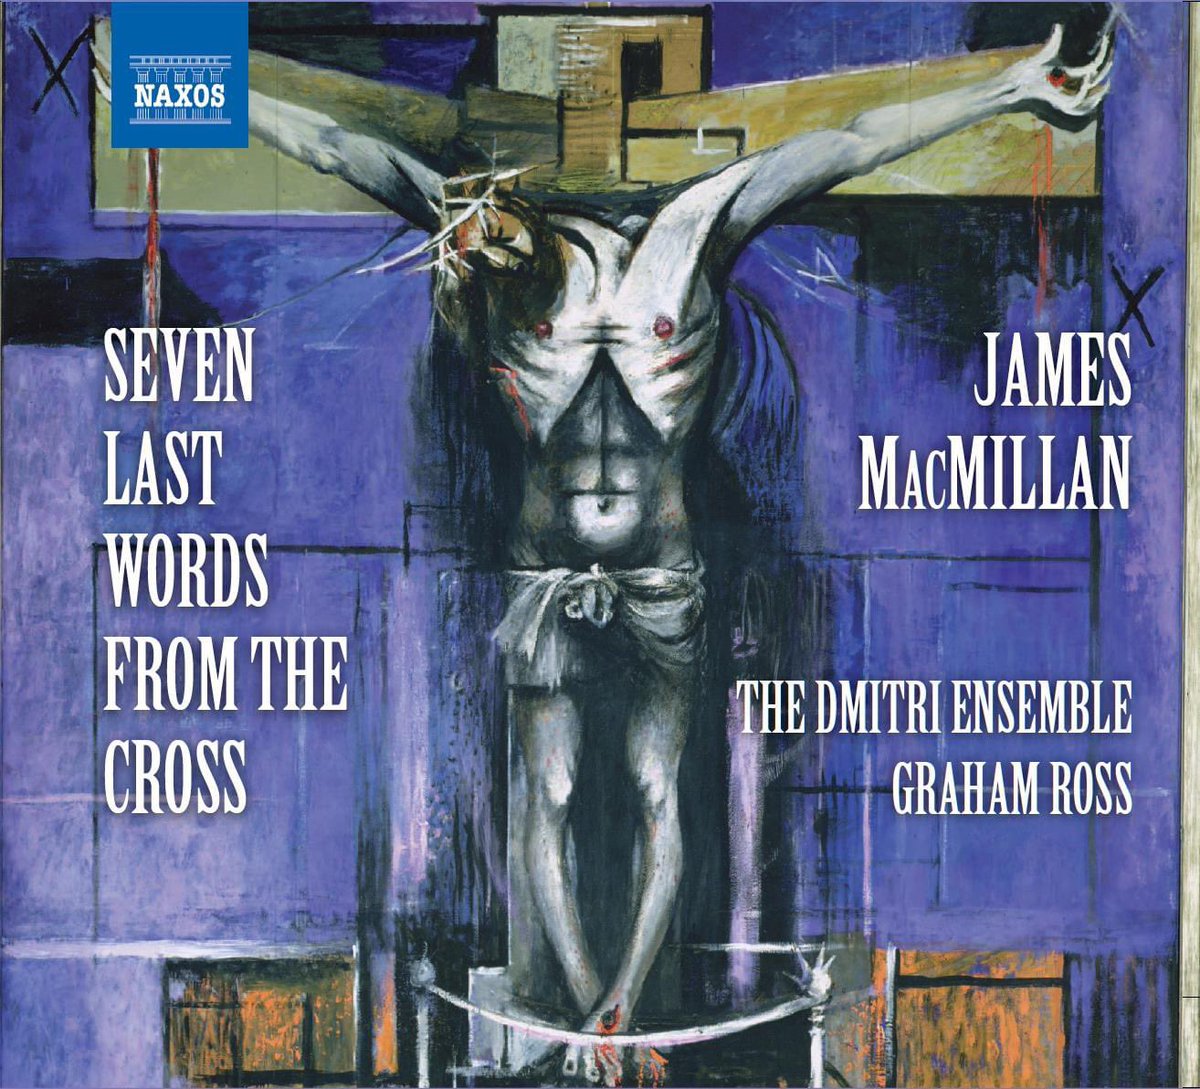 My first recording as a conductor, recorded #otd in 2008 with a whole host of magnificent colleagues. @jamesmacm’s wonderful music remains a great inspiration to me, this piece especially. @naxosrecords #SevenLastWords #JamesMacMillan #DmitriEnsemble